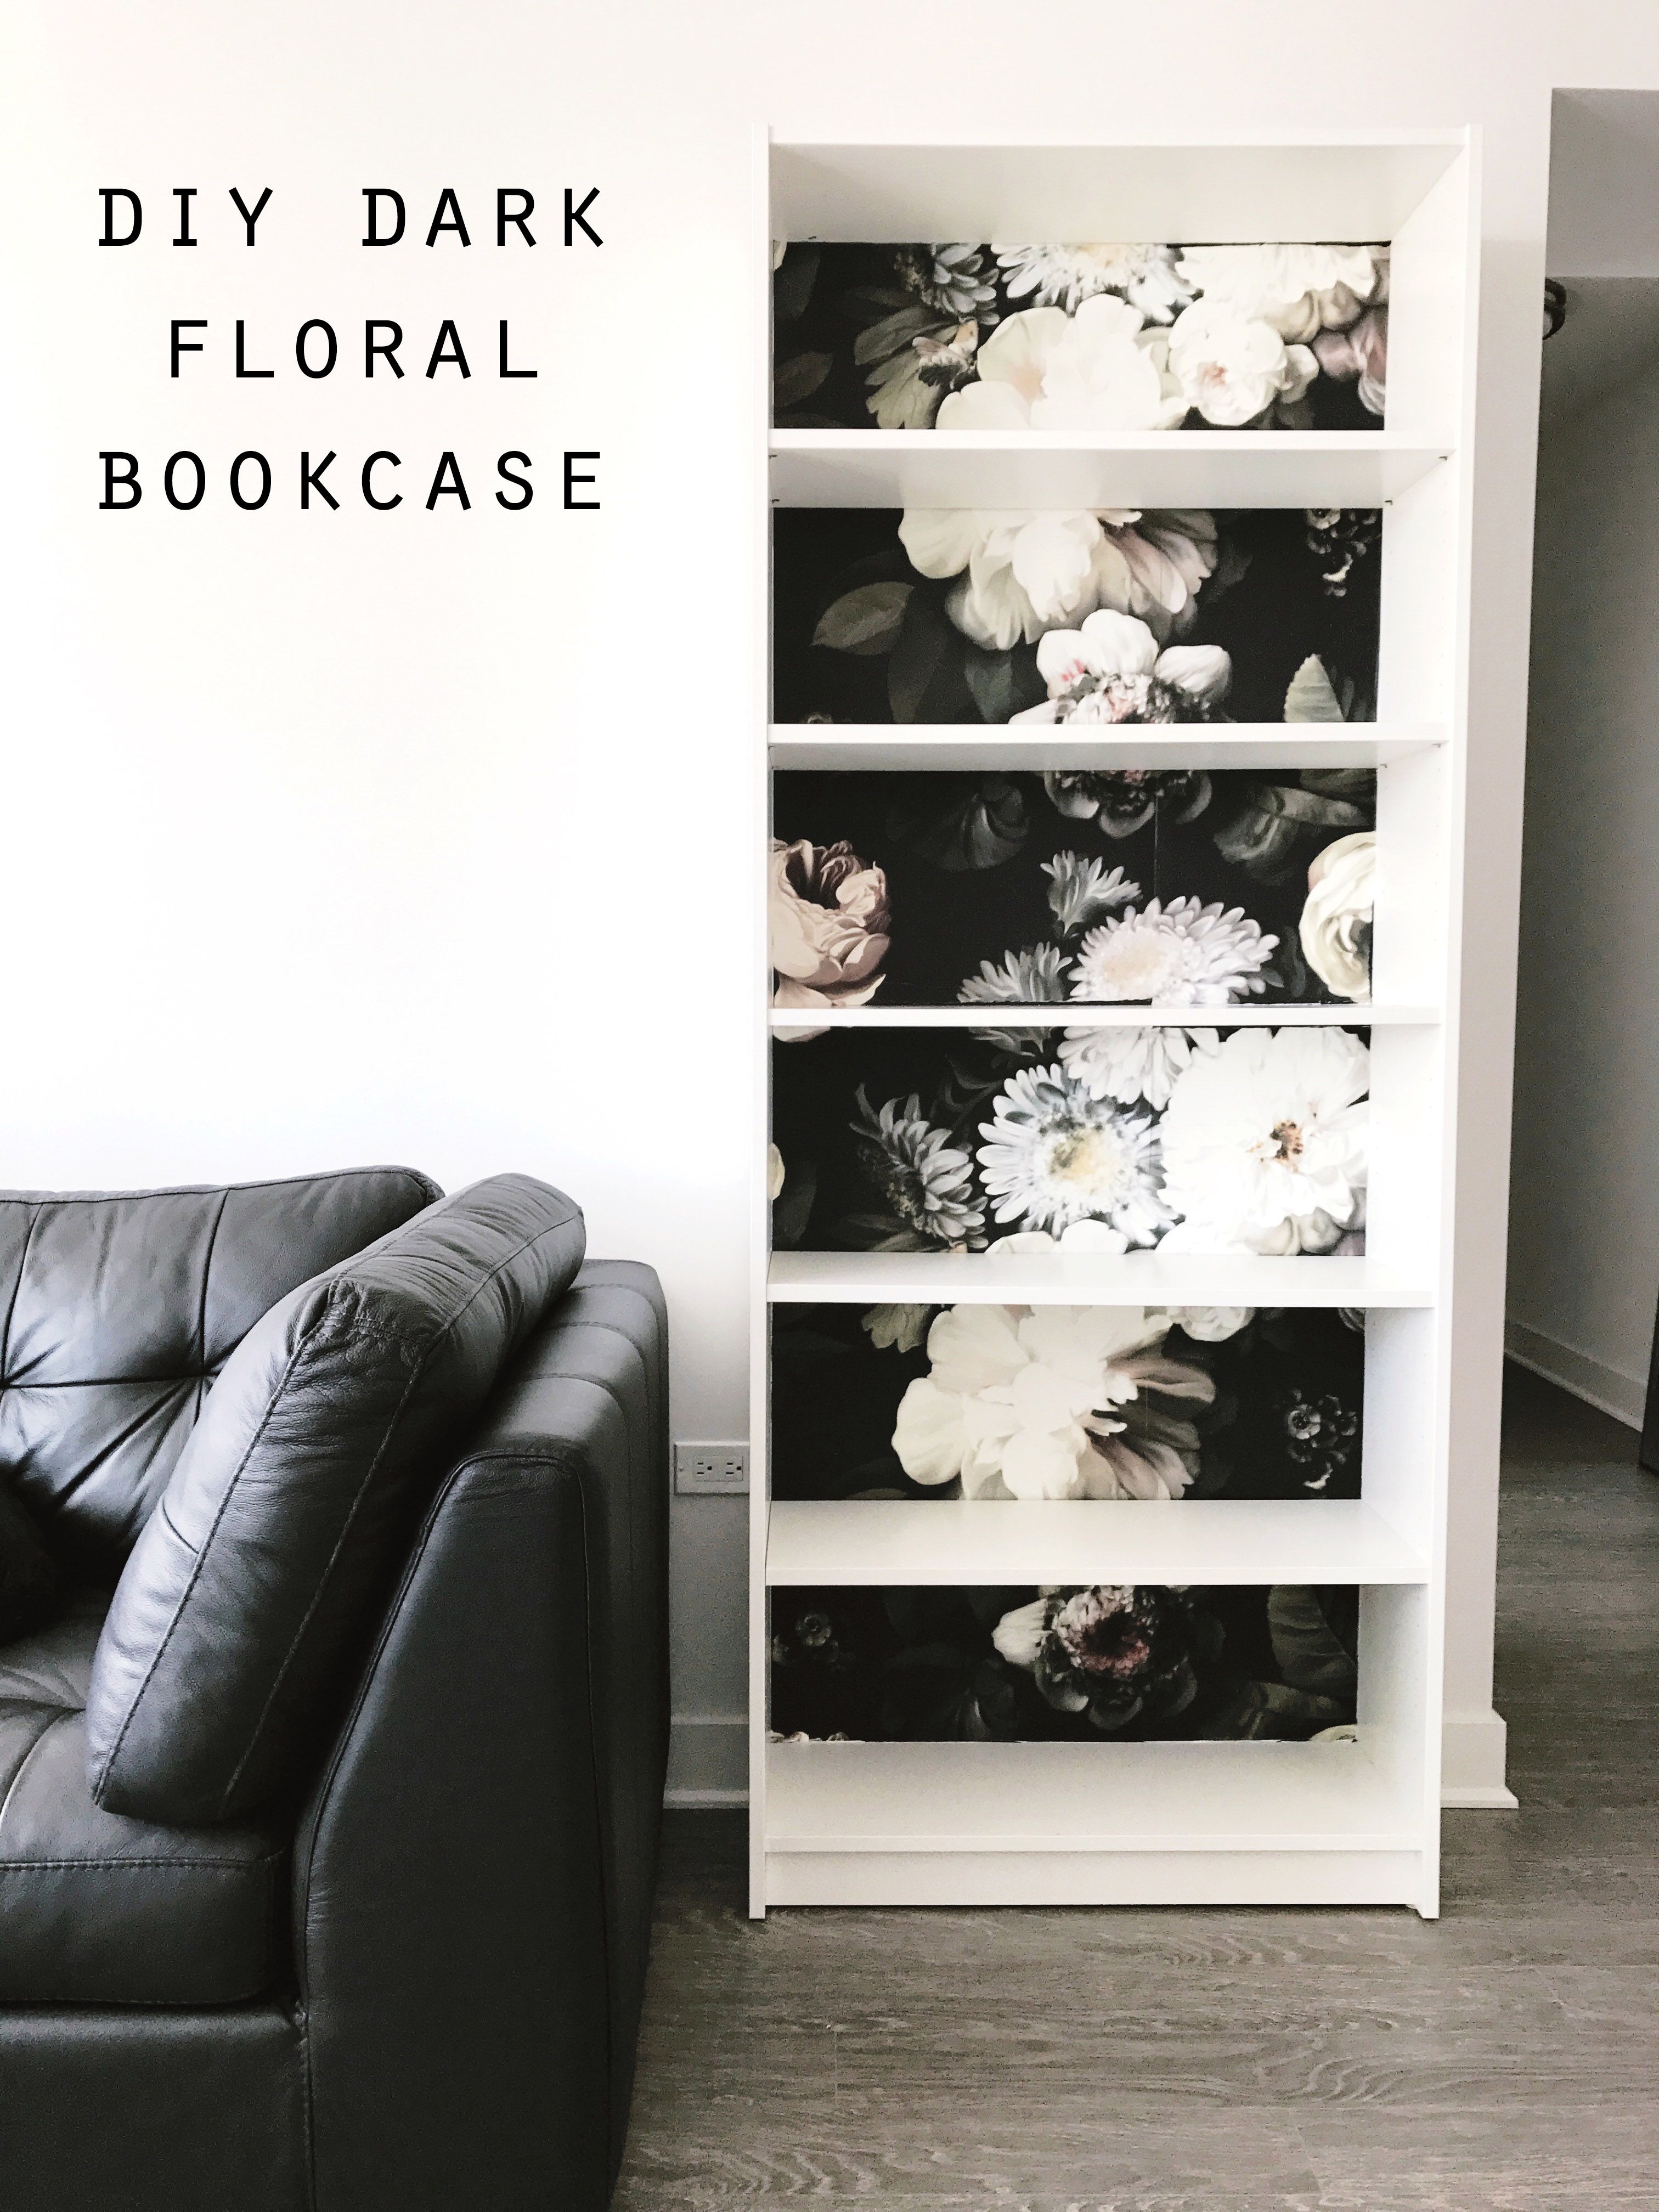 Diy Dark Floral Bookcase And Some Great Art Design